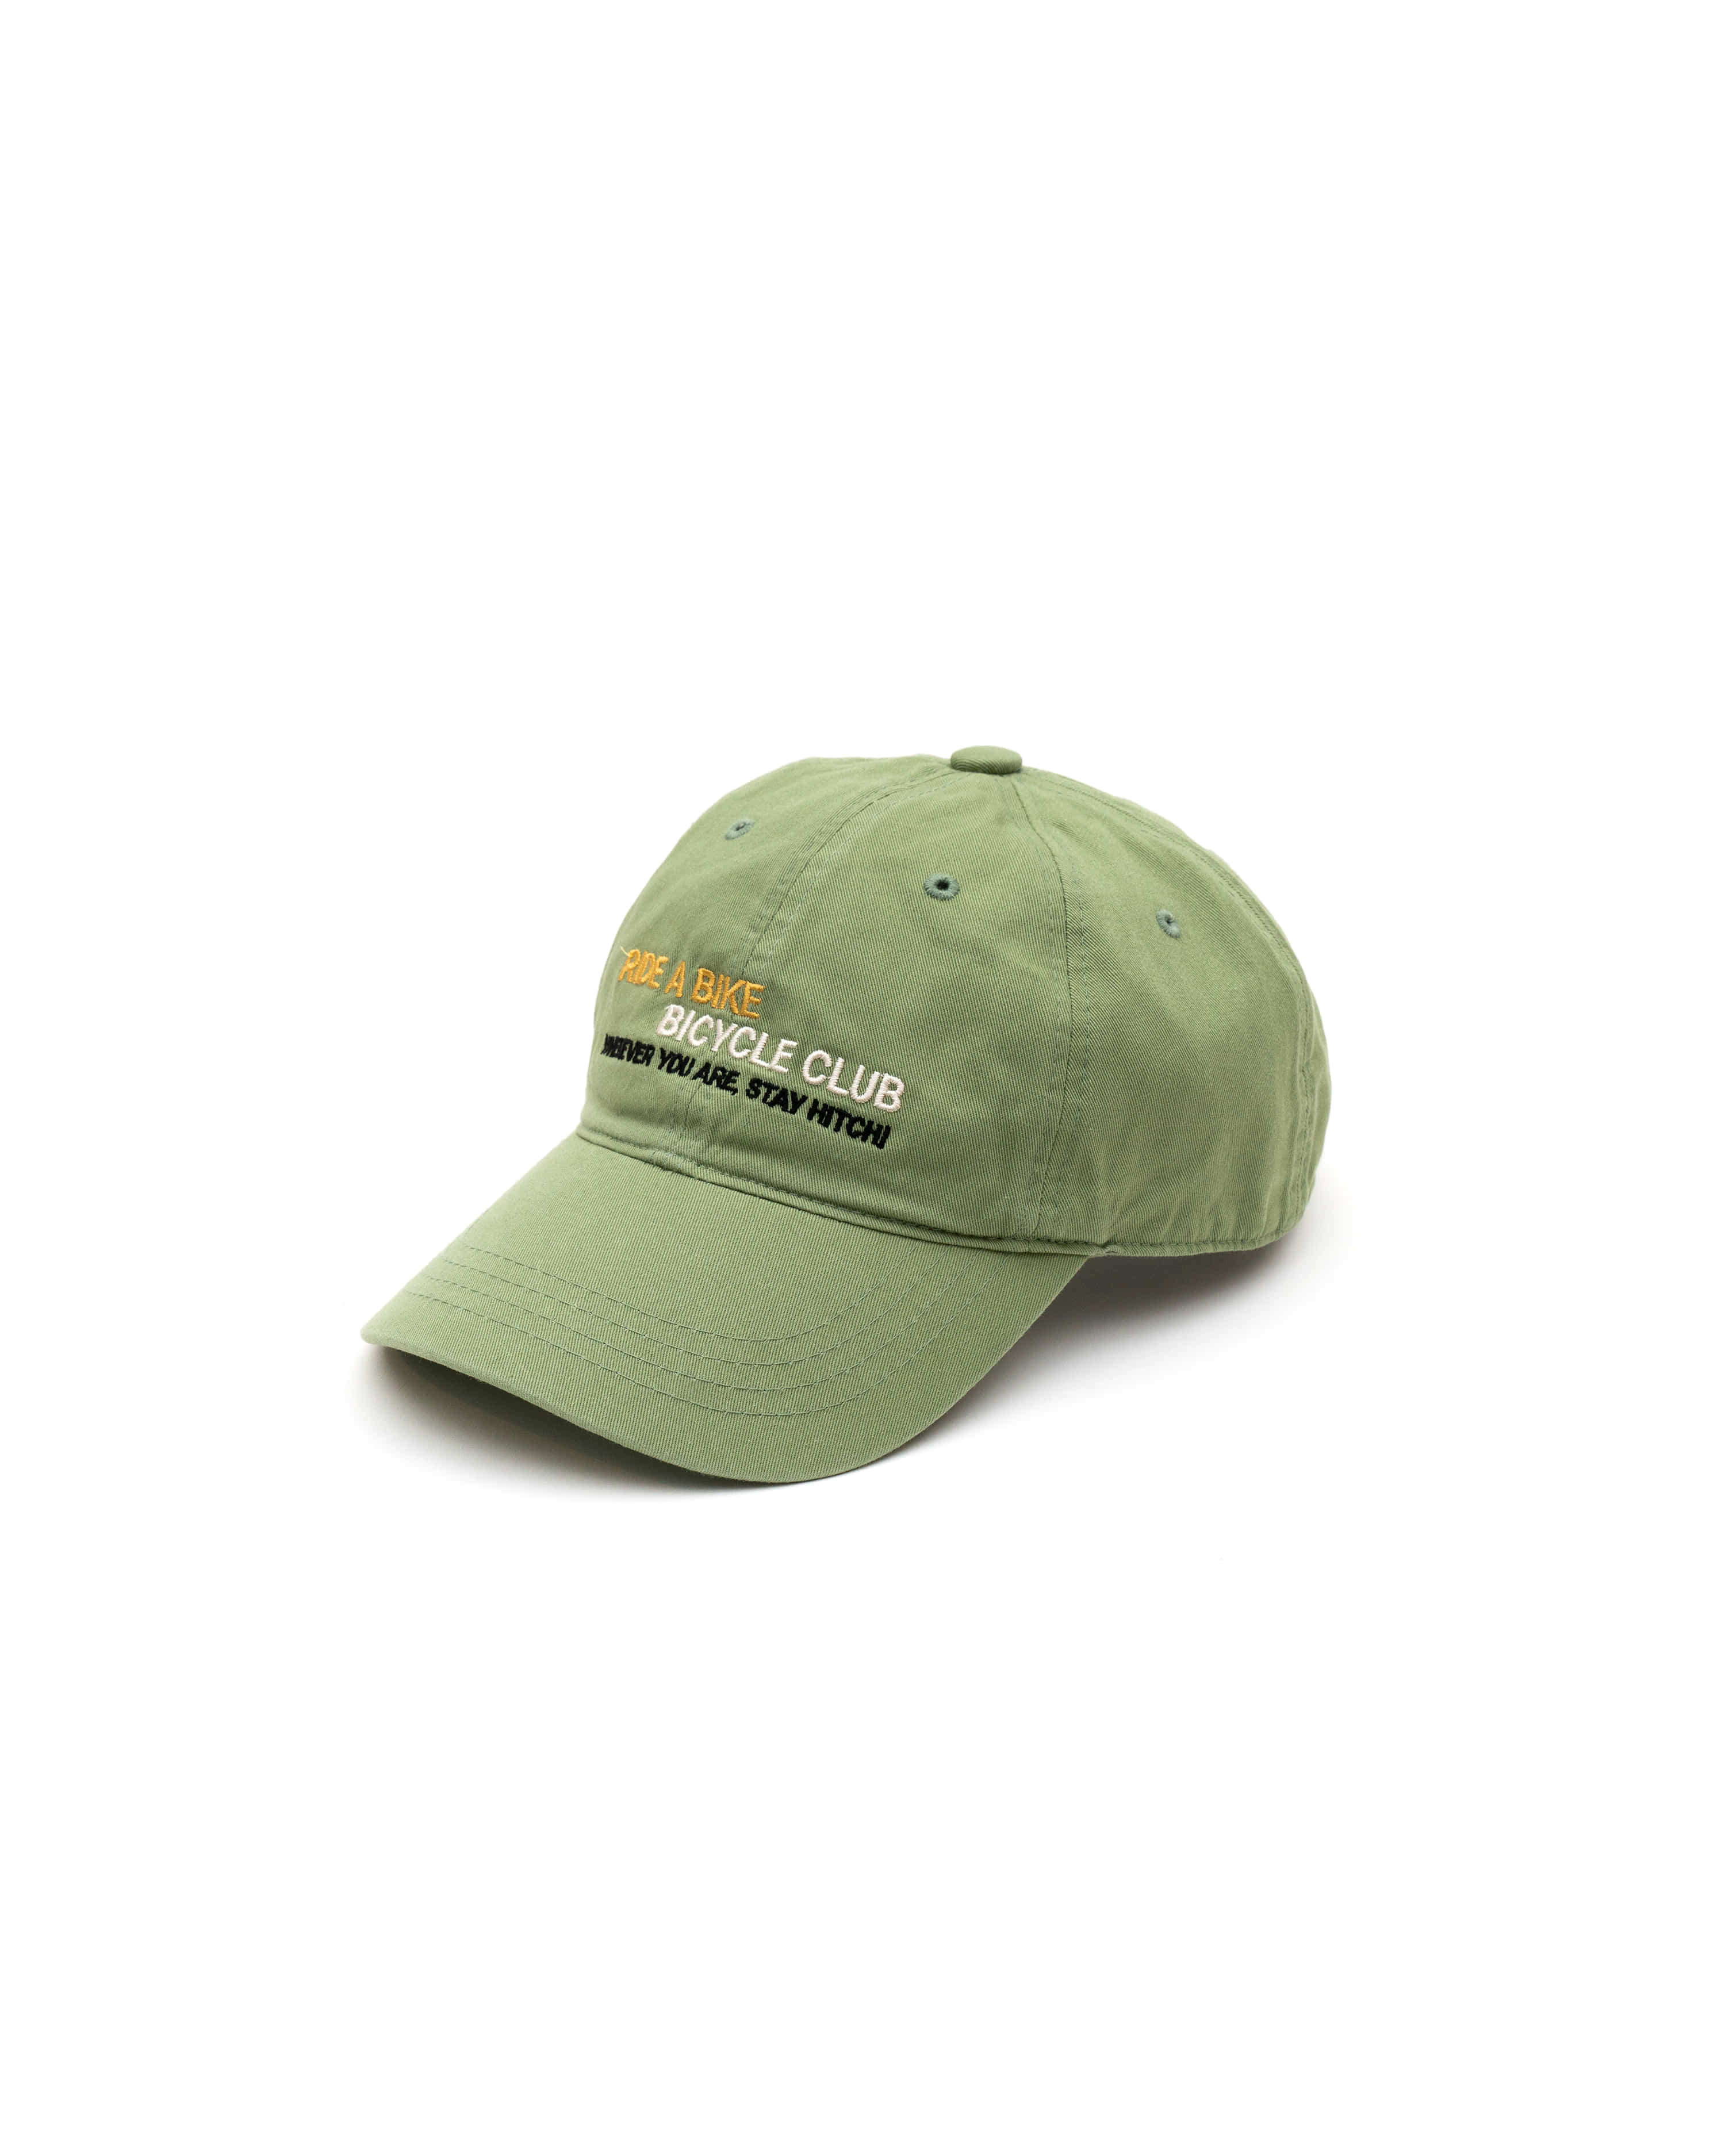 Campus 1 - olive green